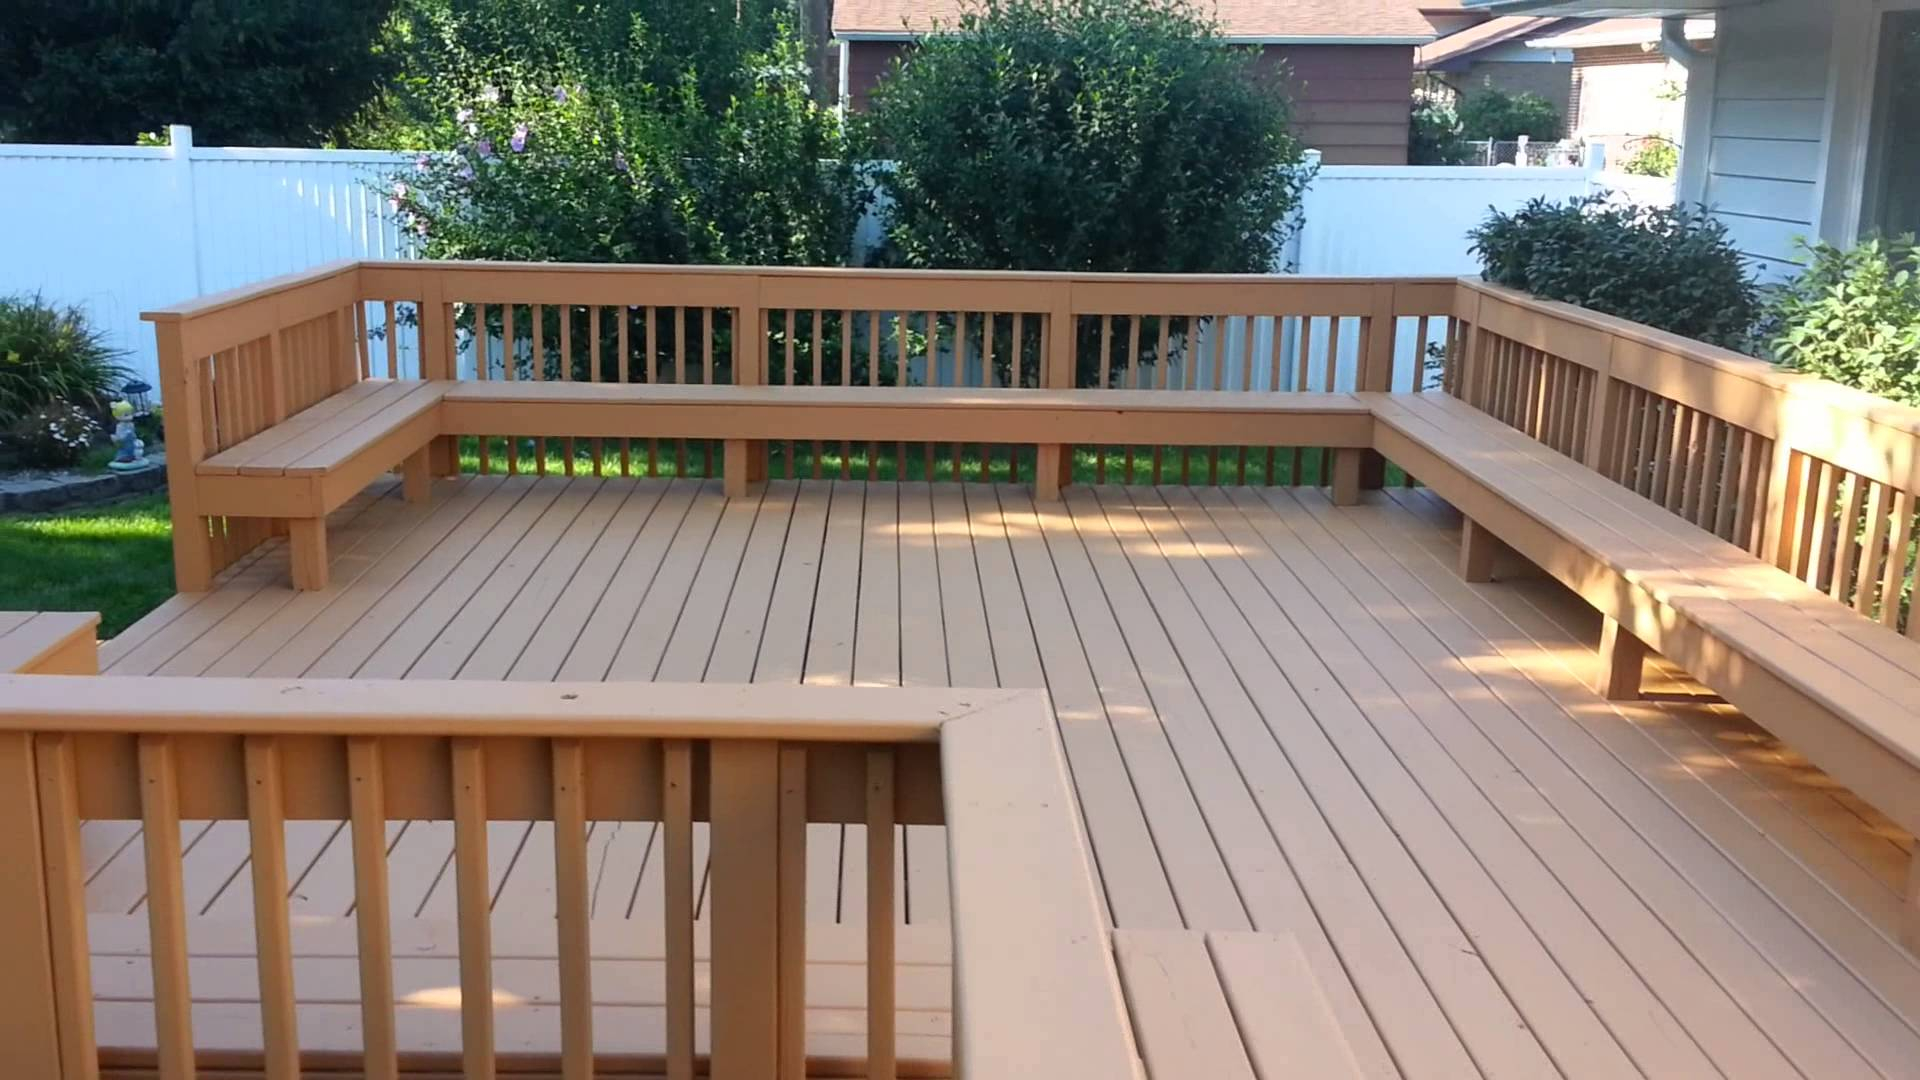 Sherwin Williams Deck Coating Slubne Suknie intended for sizing 1920 X 1080